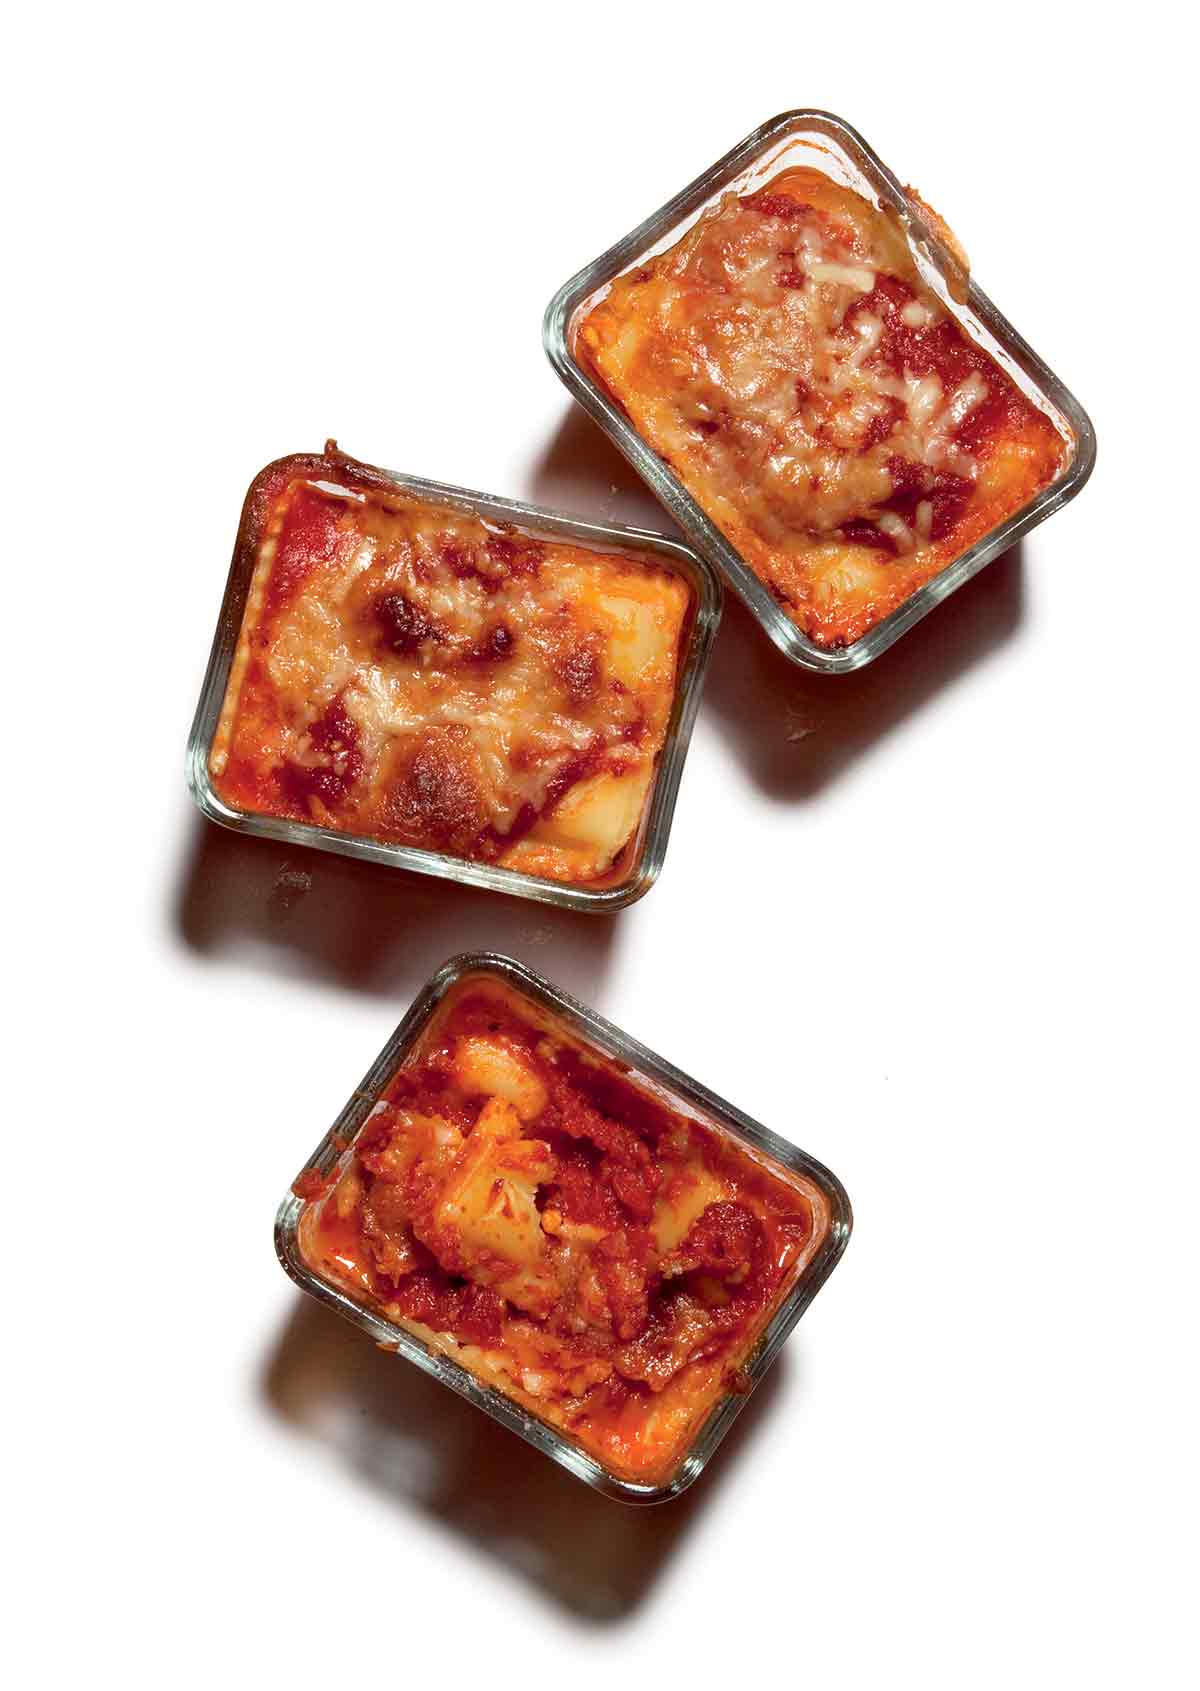 Three personal pan lasagnas in glass dishes.